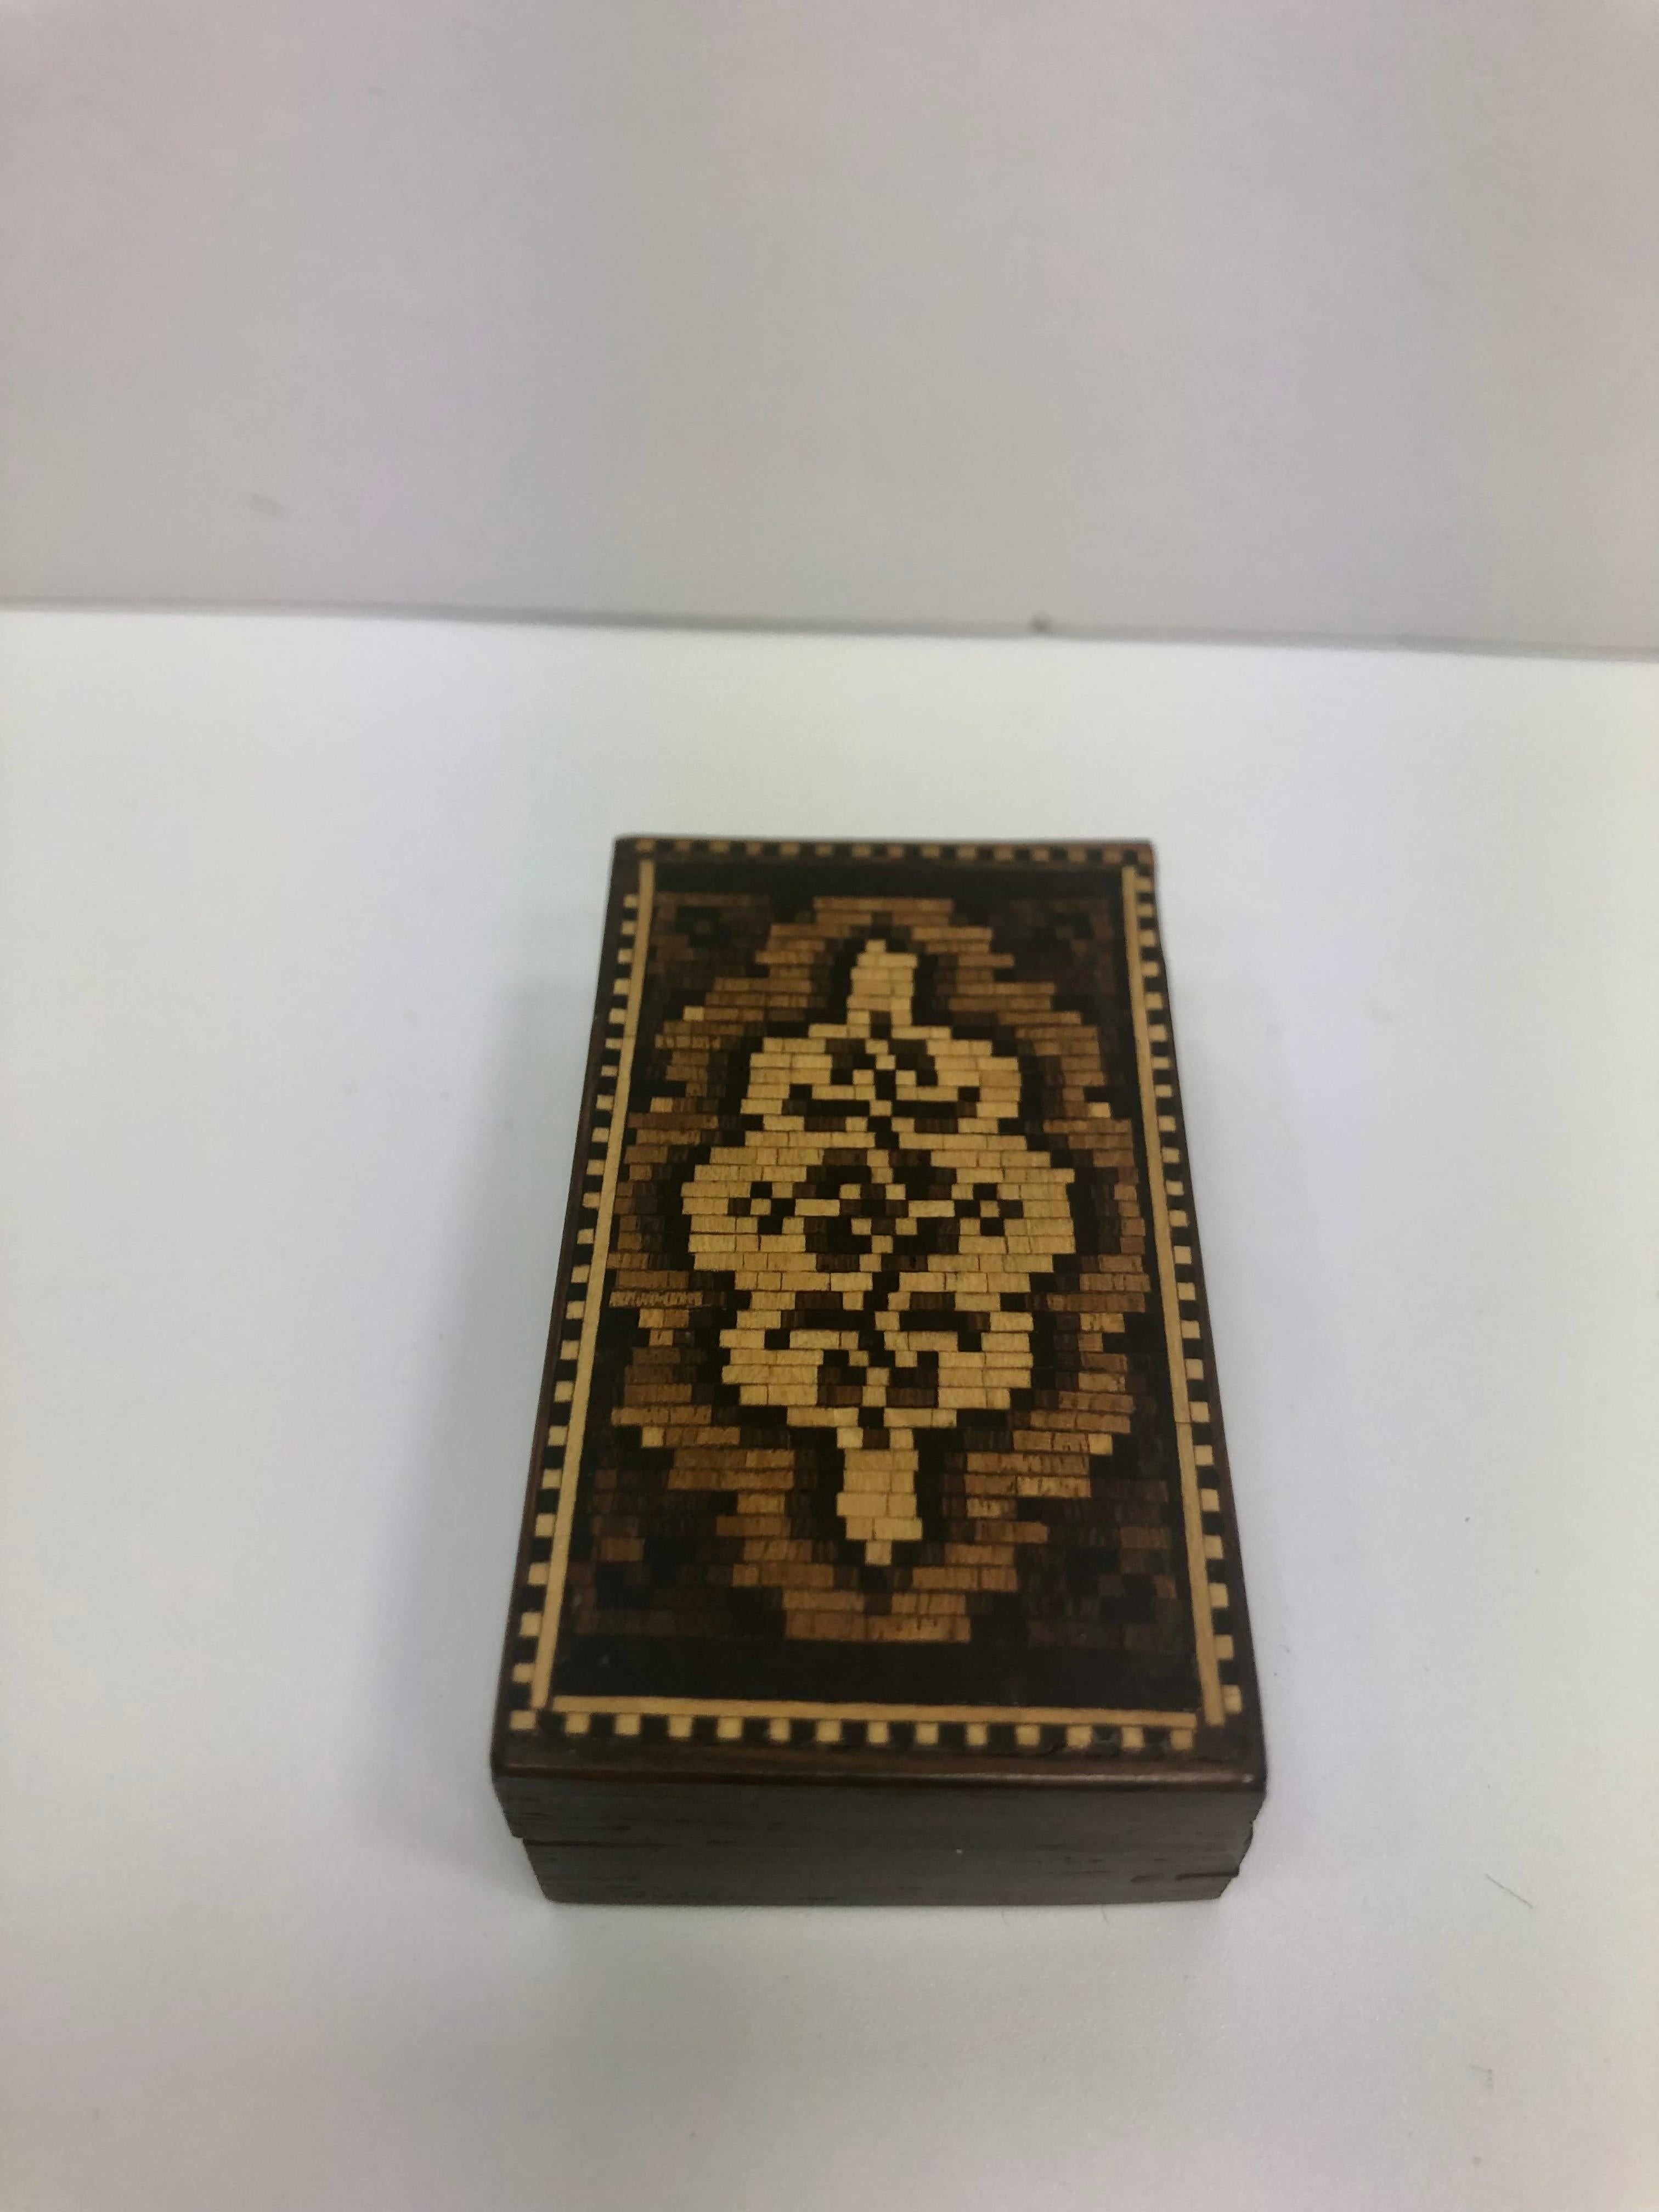 Tunbridge wooden trinket box made in England in the 1850s with an intricate design. Tunbridge wooden trinket box made in England in the 1850s. Tunbridge ware is a form of decoratively inlaid woodwork, typically in the form of boxes, that is